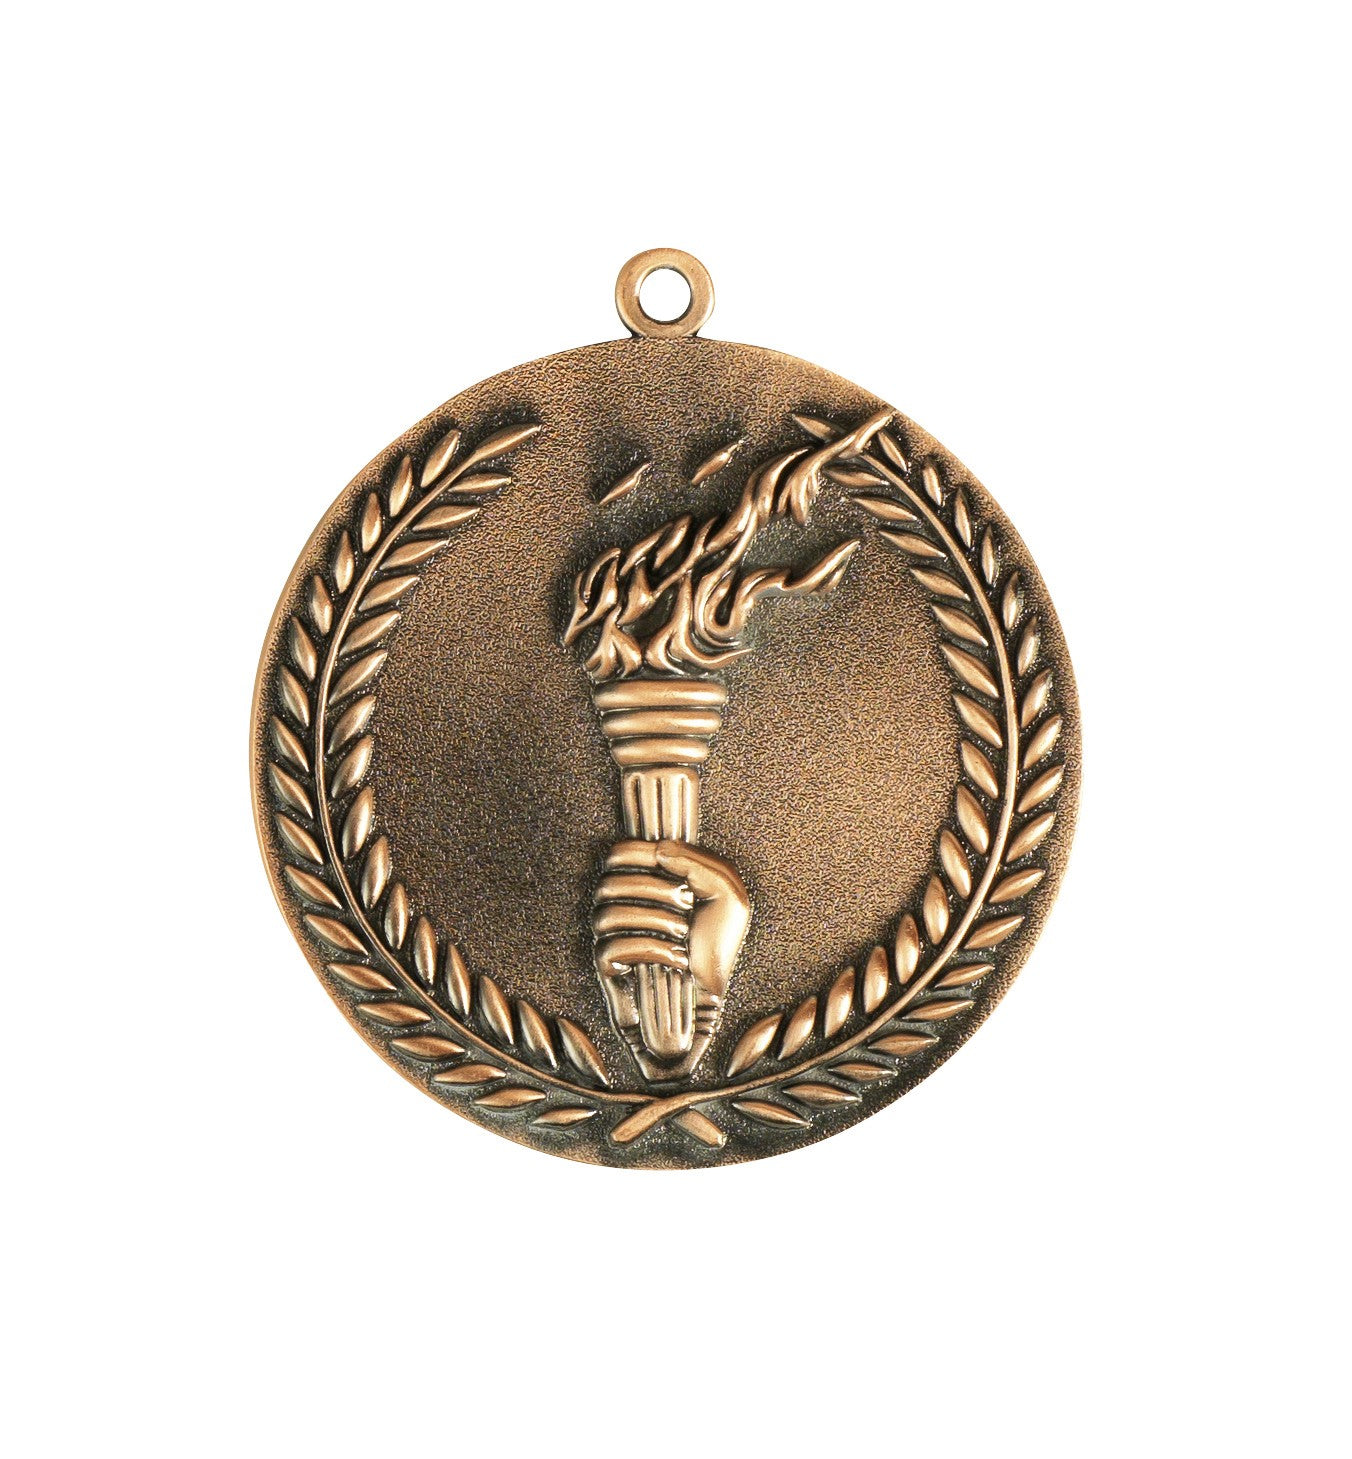 MB 68mm Victory Torch Medal - 3 Colours